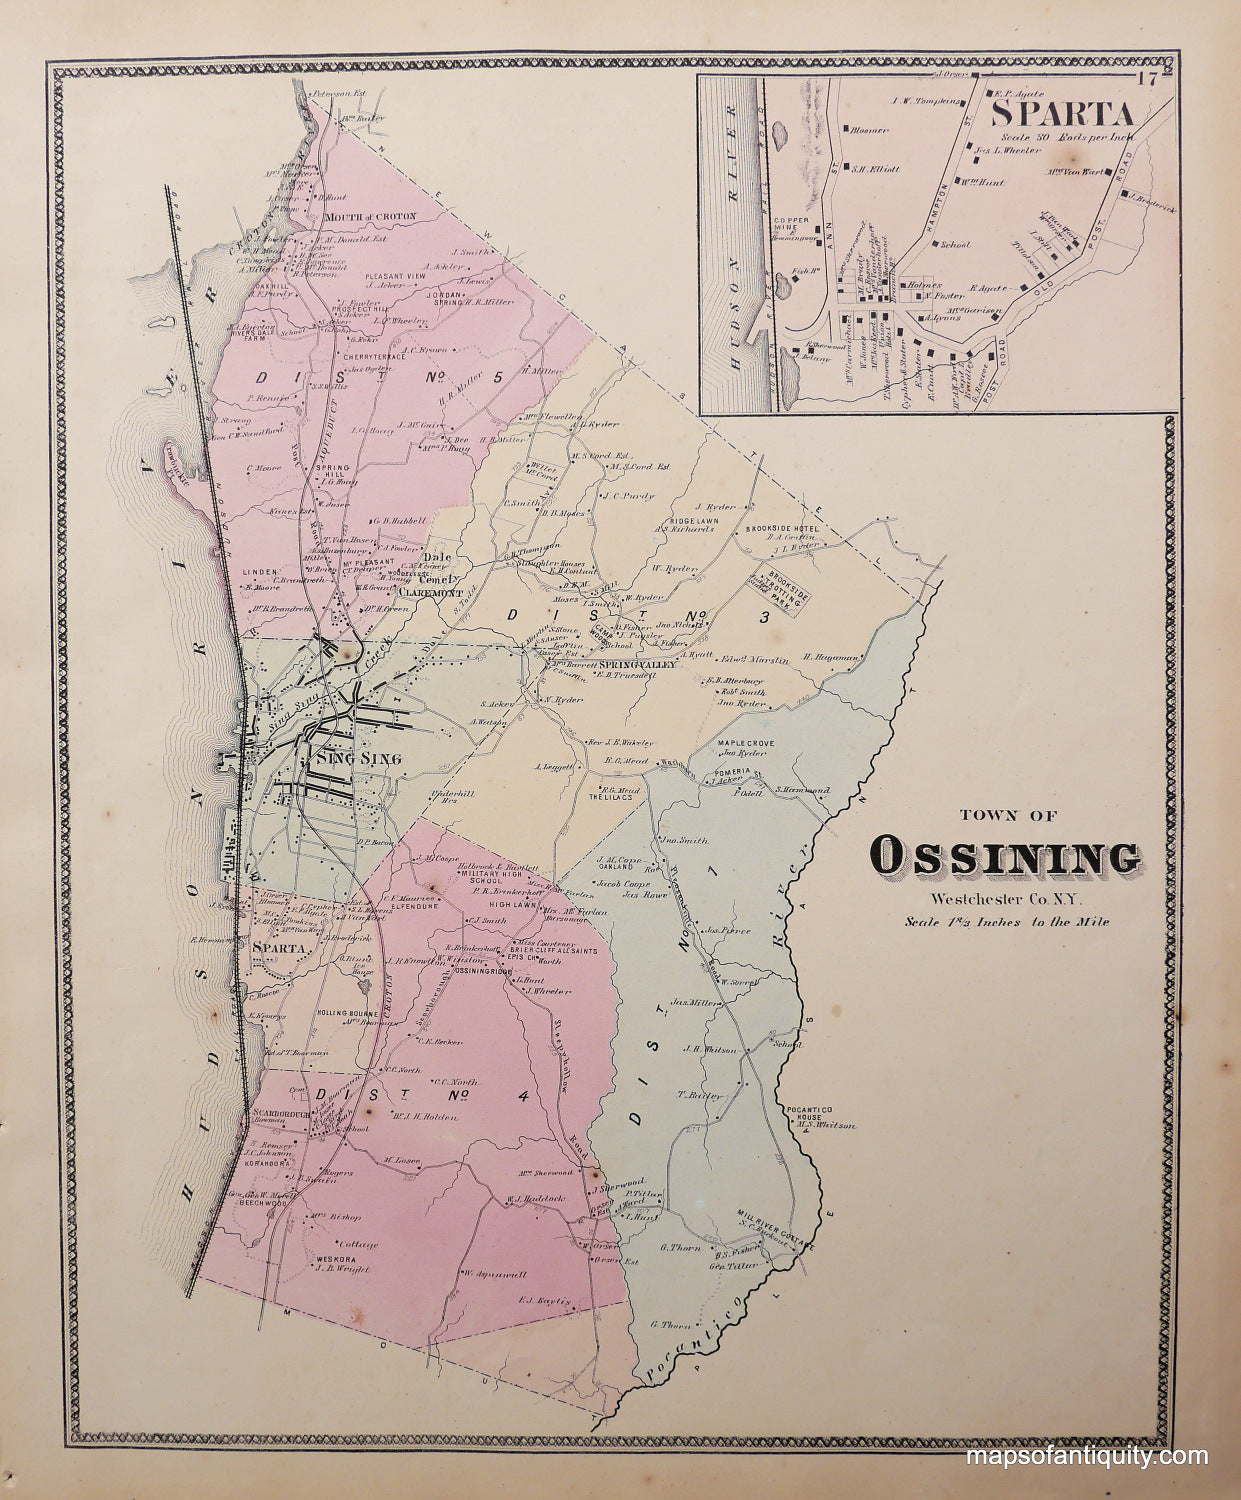 Antique-Hand-Colored-Map-Town-of-Ossining-Westchester-Co.-N.Y.-(with-inset-of-Sparta)-United-States-Northeast-1867-Beers-Maps-Of-Antiquity